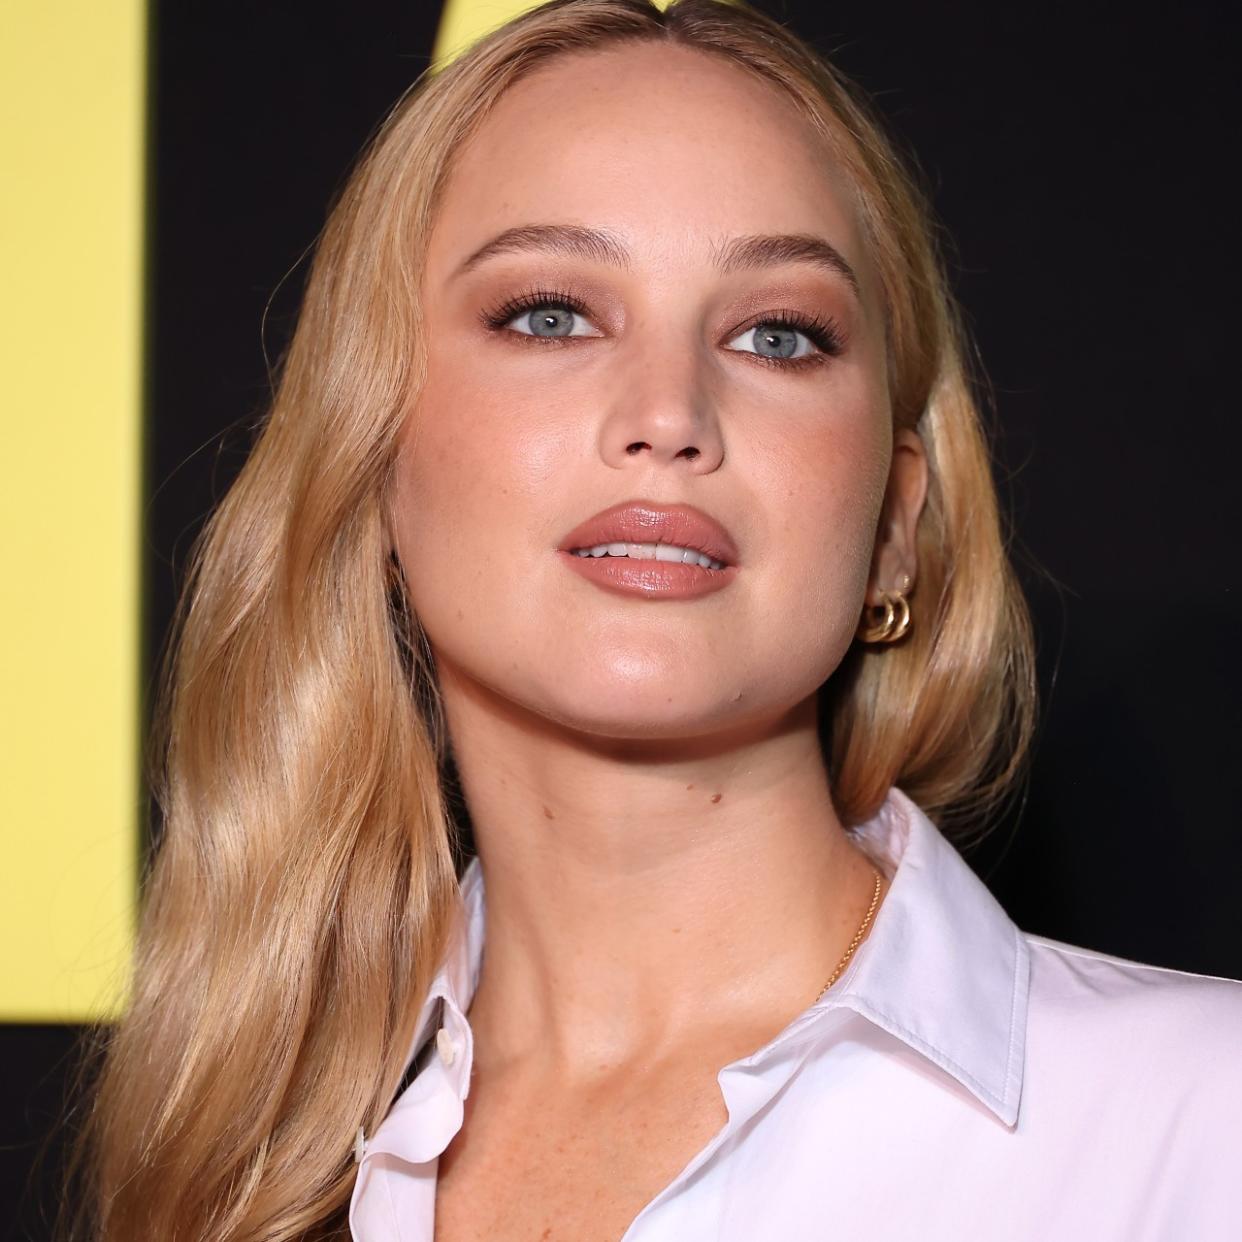  Jennifer Lawrence at an event. 